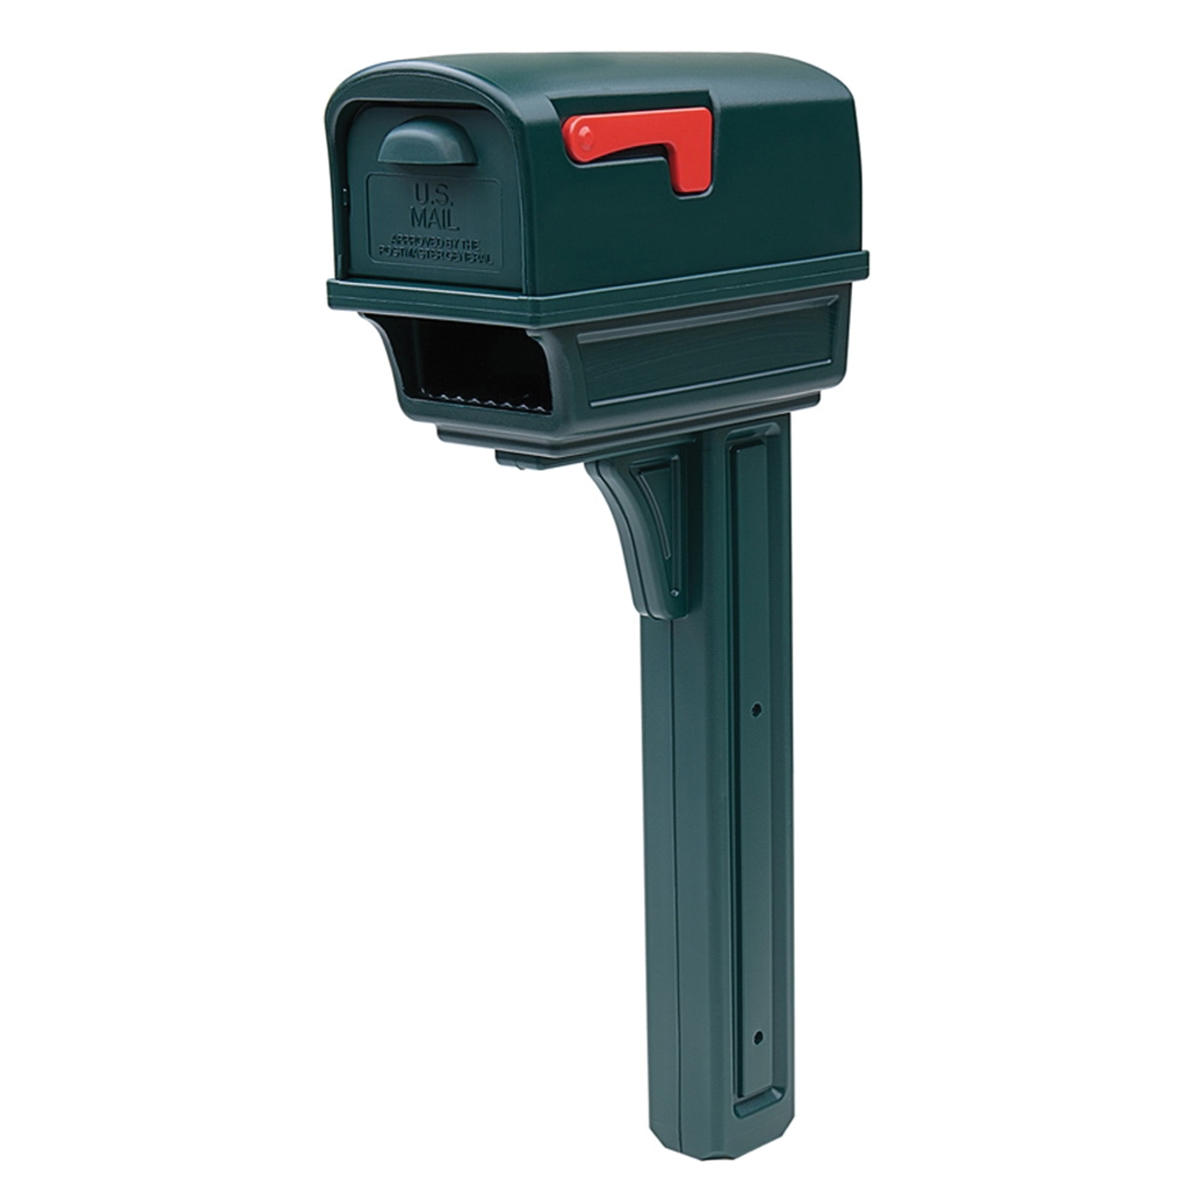 Gentry GGC1G0000 Mailbox and Post Combo, 1000 cu-in Mailbox, Plastic Mailbox, 36.38 in H Post